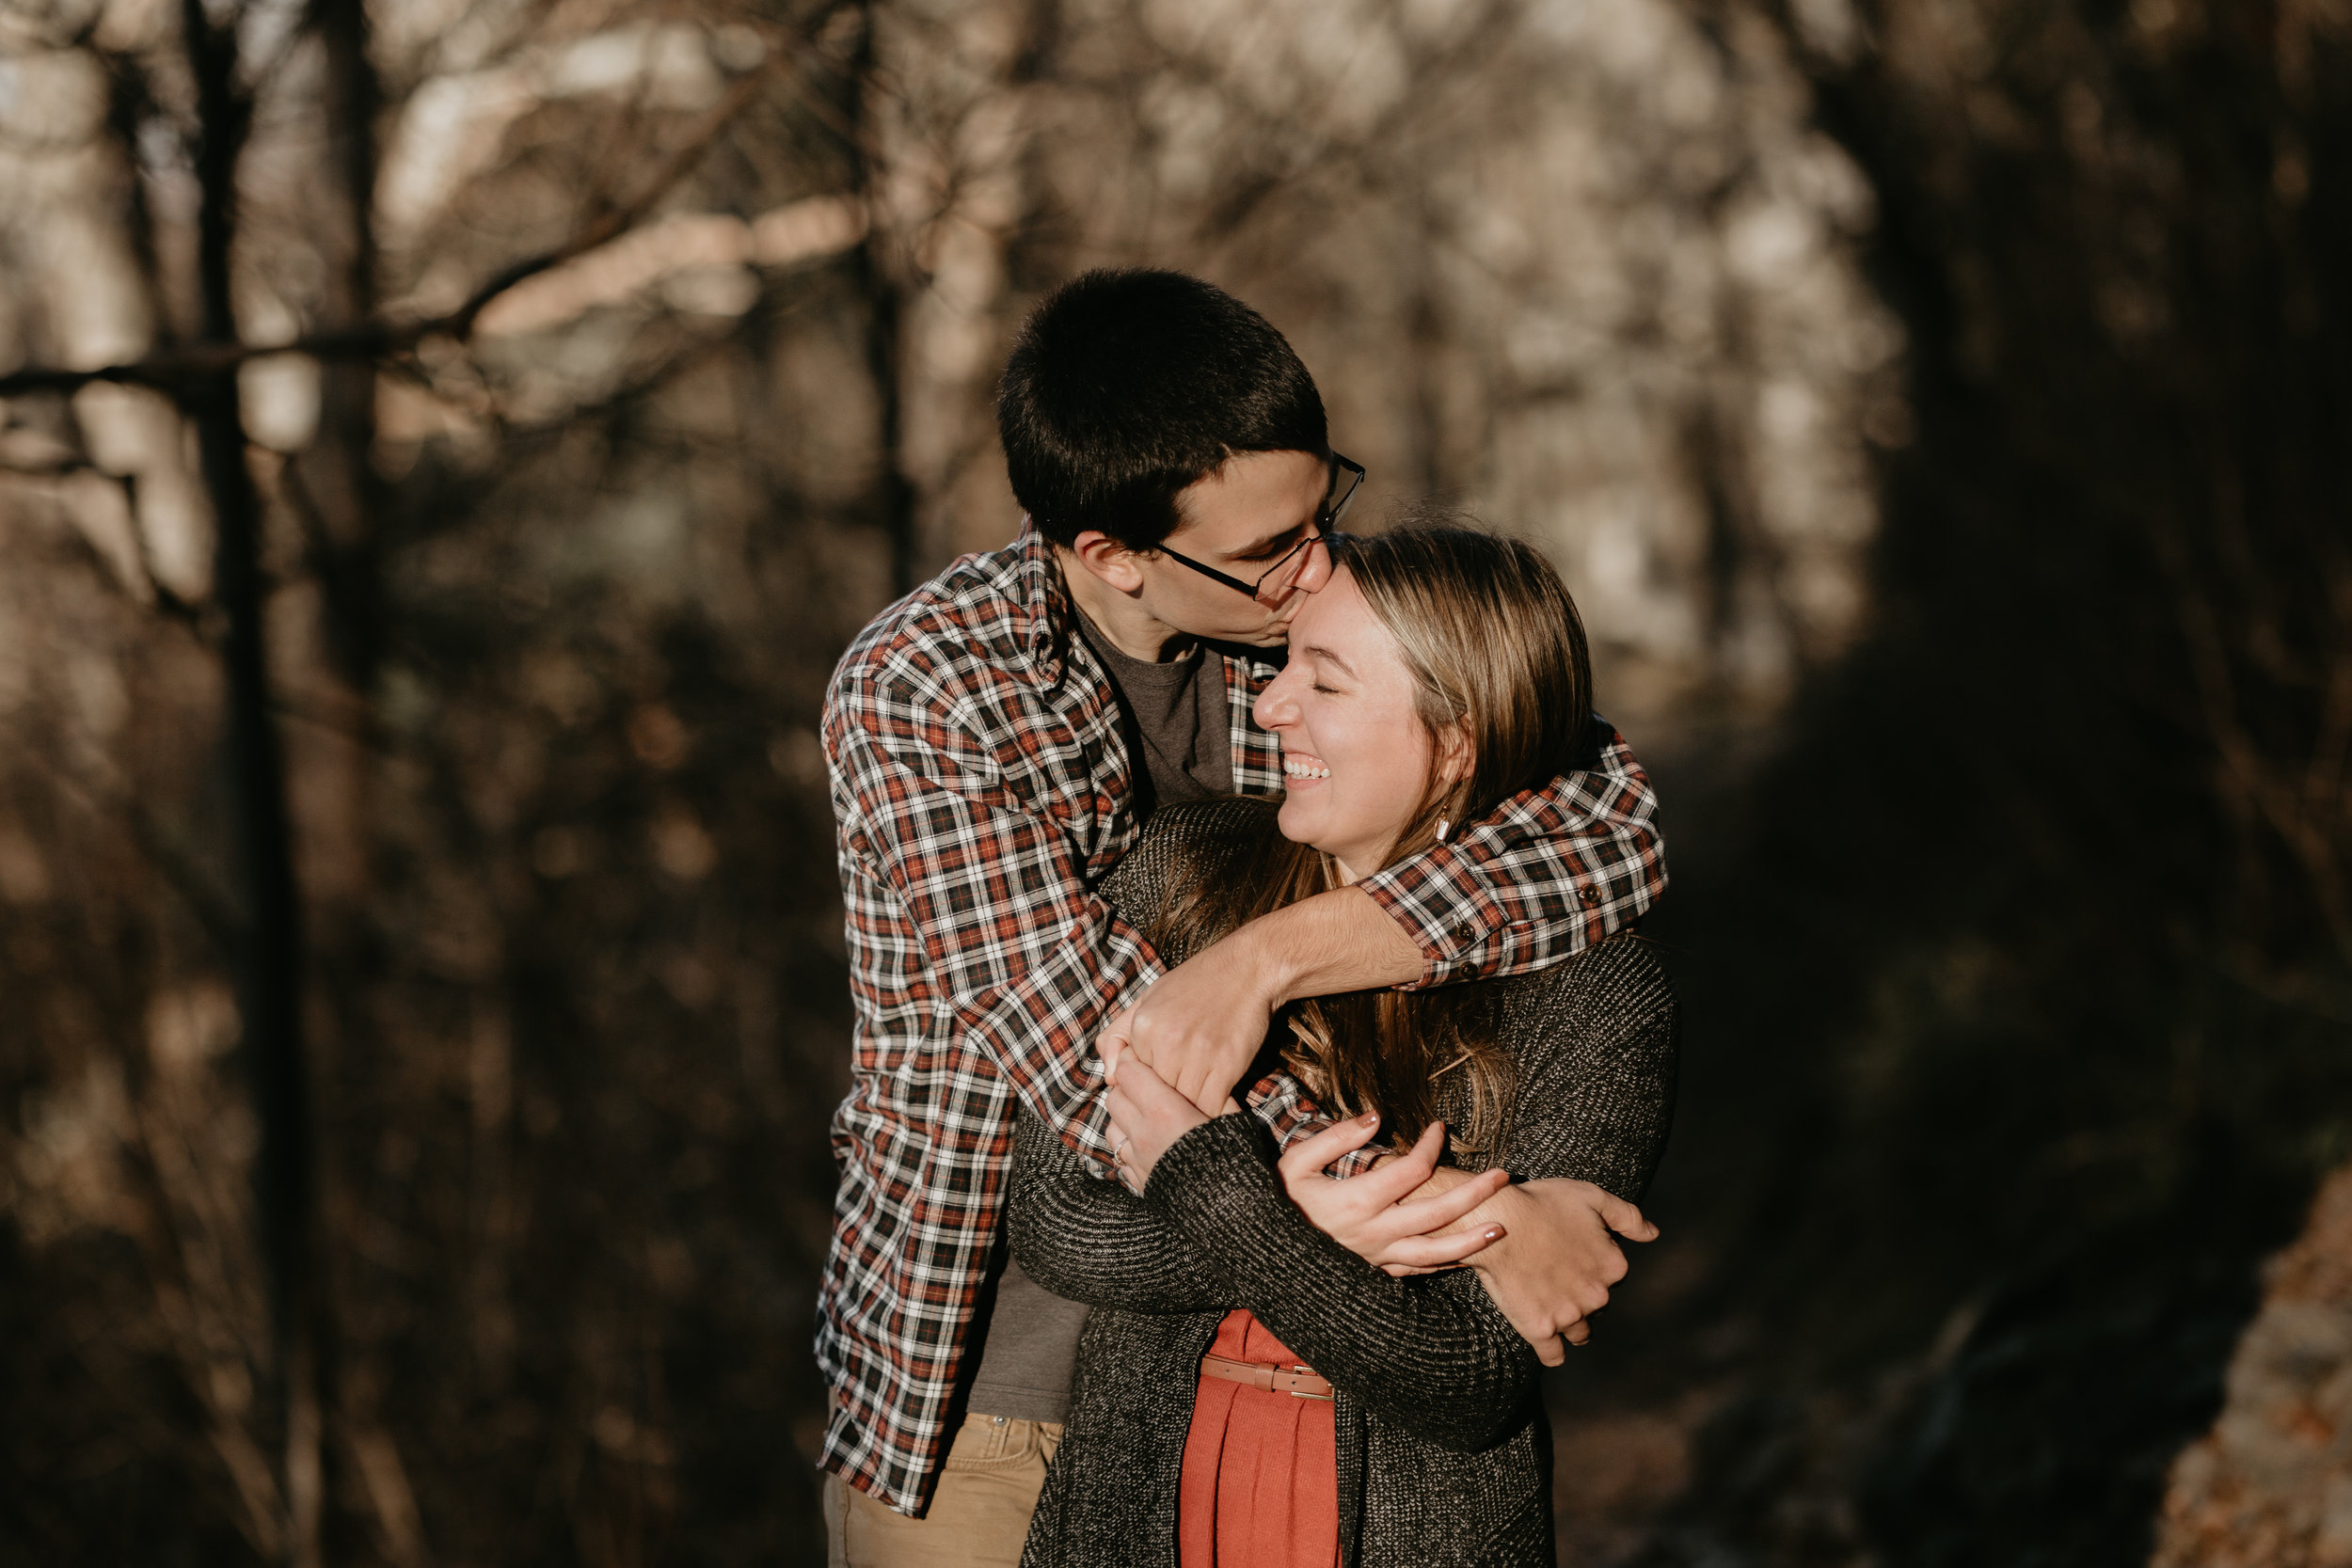 nicole-daacke-photography-shenandoah-national-park-adventure-engagement-session-with-fall-foliage-shenandoah-elopement-photographer-engagement-photos-in-virginia-charlottesville-national-park-adventure-elopement-photographer-3673.jpg